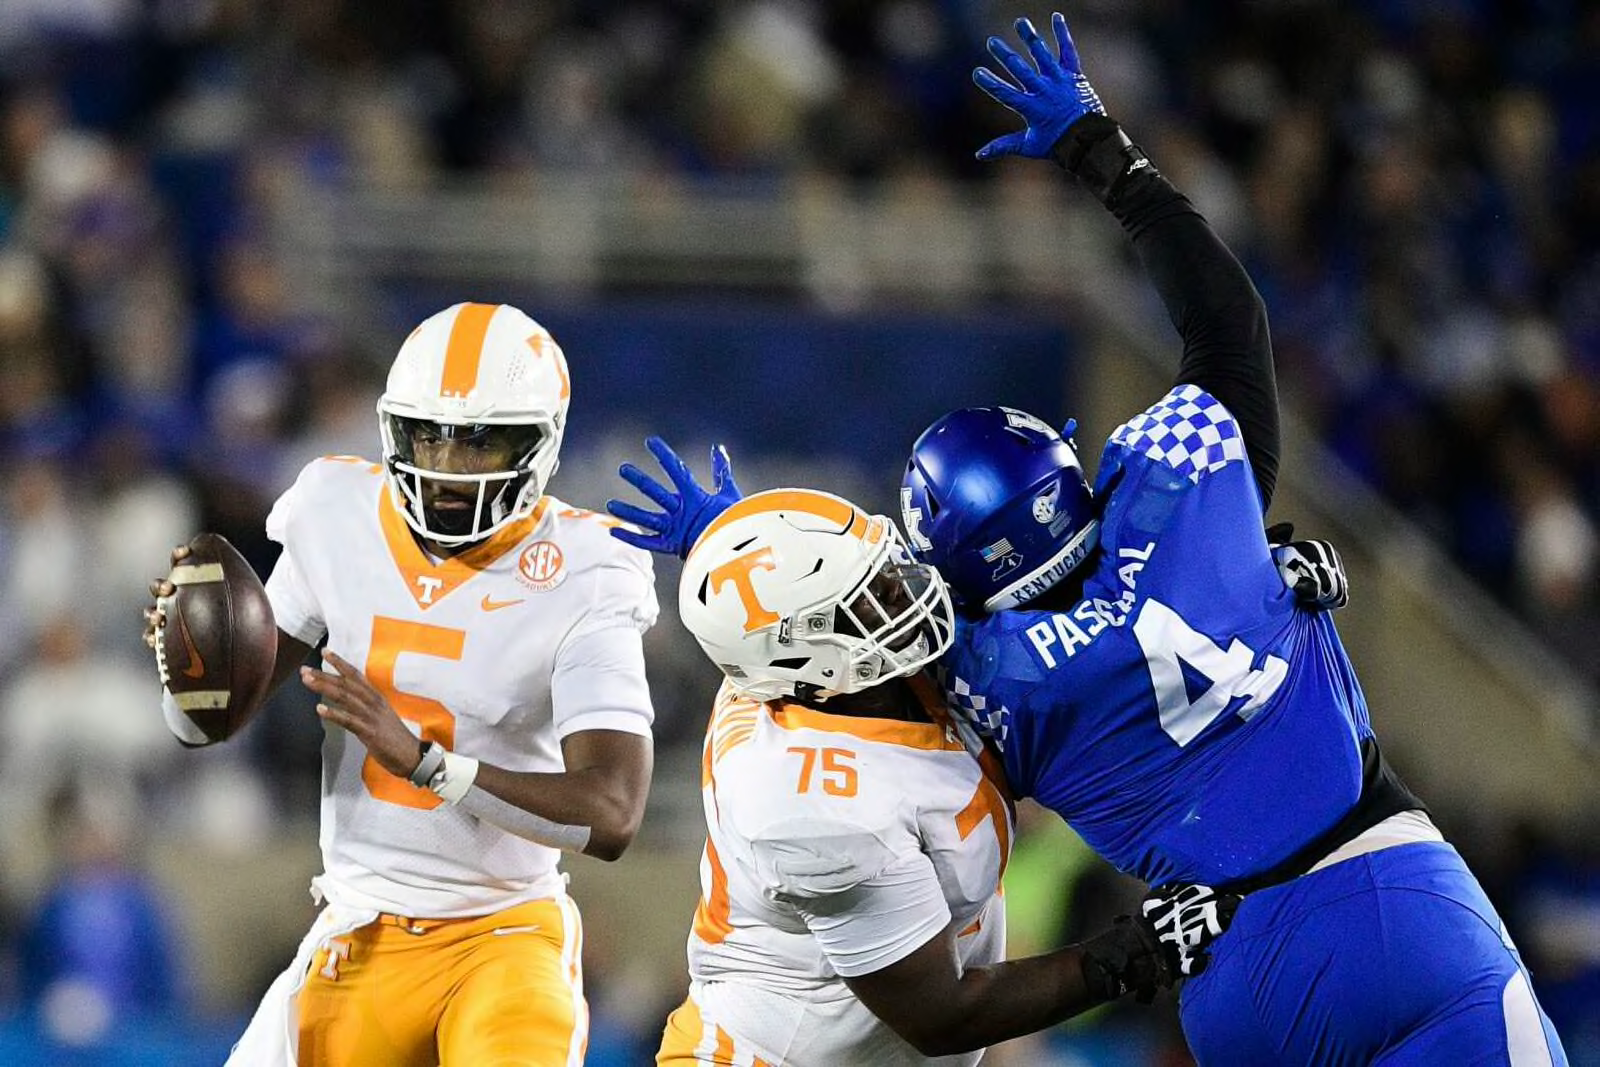 Tennessee quarterback Hendon Hooker (5) looks to pass as Tennessee offensive lineman Jerome Carvin (75) defends against Kentucky defensive end Josh Paschal (4) during an SEC football game between Tennessee and Kentucky at Kroger Field in Lexington, Ky. on Saturday, Nov. 6, 2021.<br /> Kns Tennessee Kentucky Football